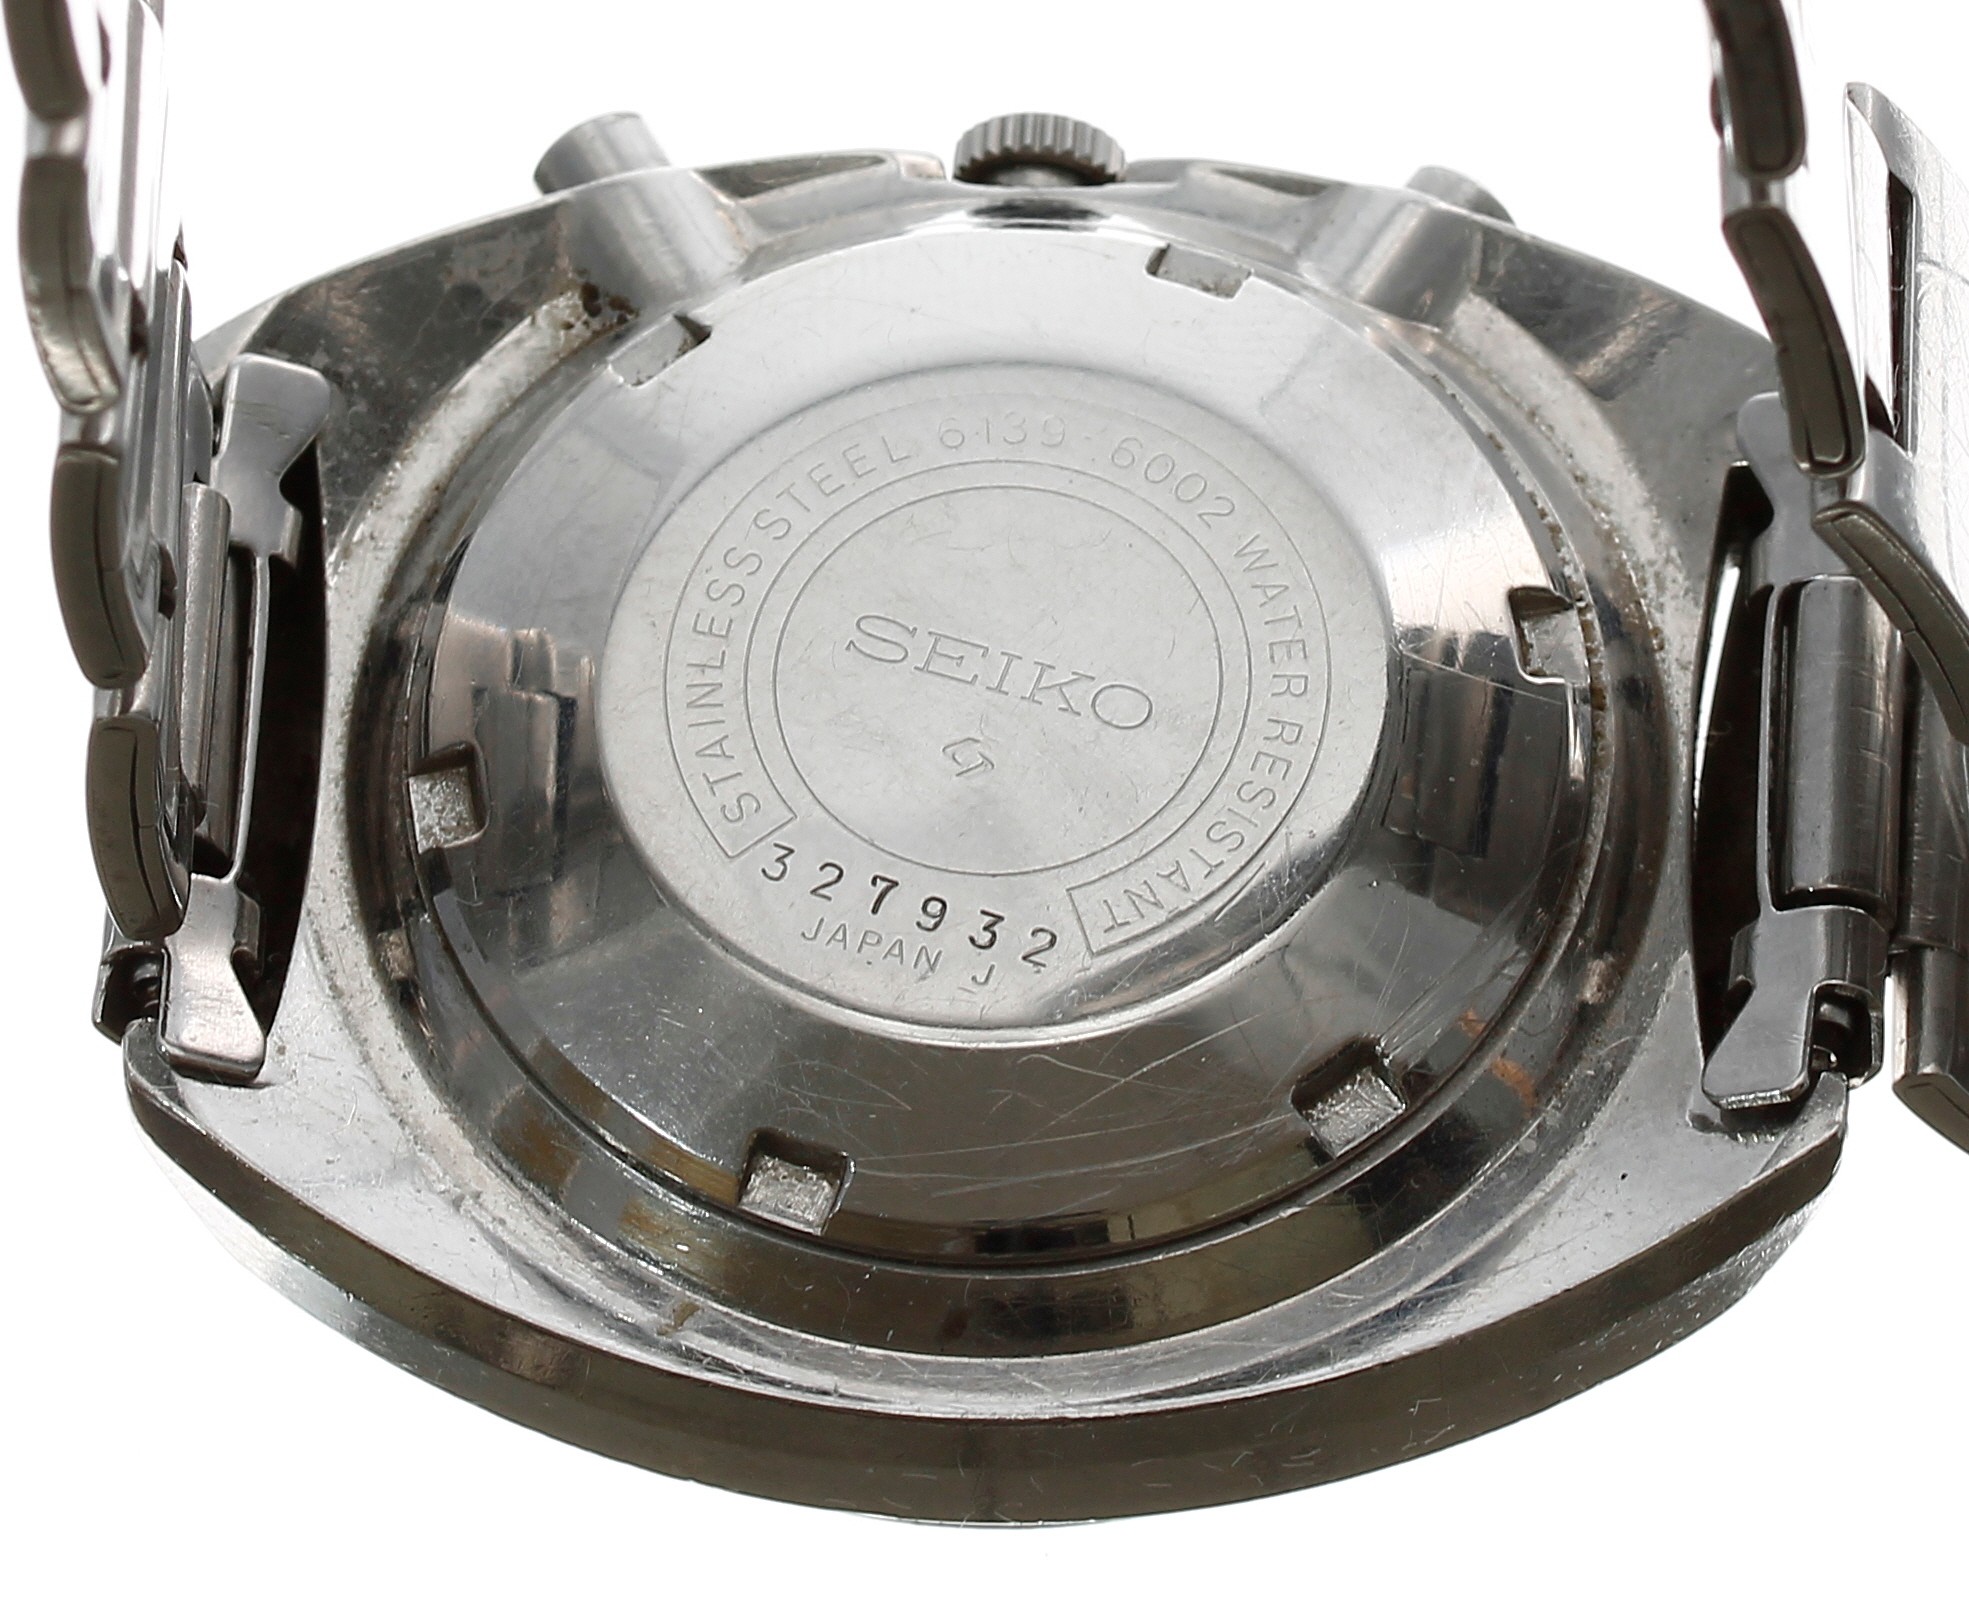 Seiko 'Pogue' Chronograph automatic stainless steel gentleman's wristwatch, reference no. 6139-6002, - Image 2 of 2